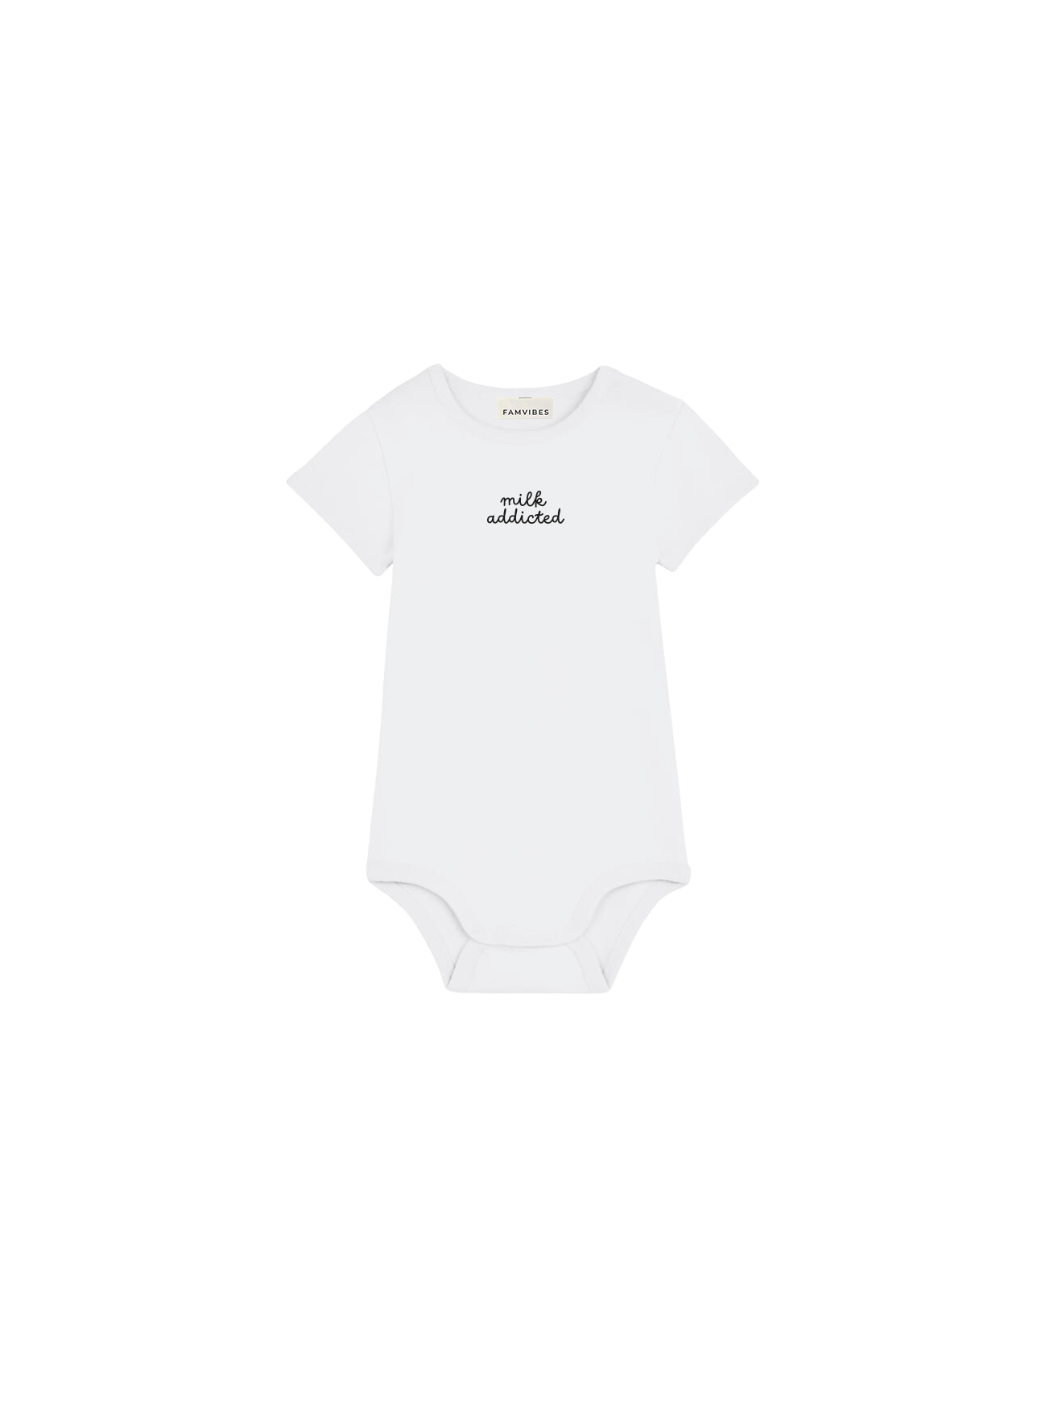 Body MILK ADDICTED 'Clean White' - The Little One • Family.Concept.Store. 